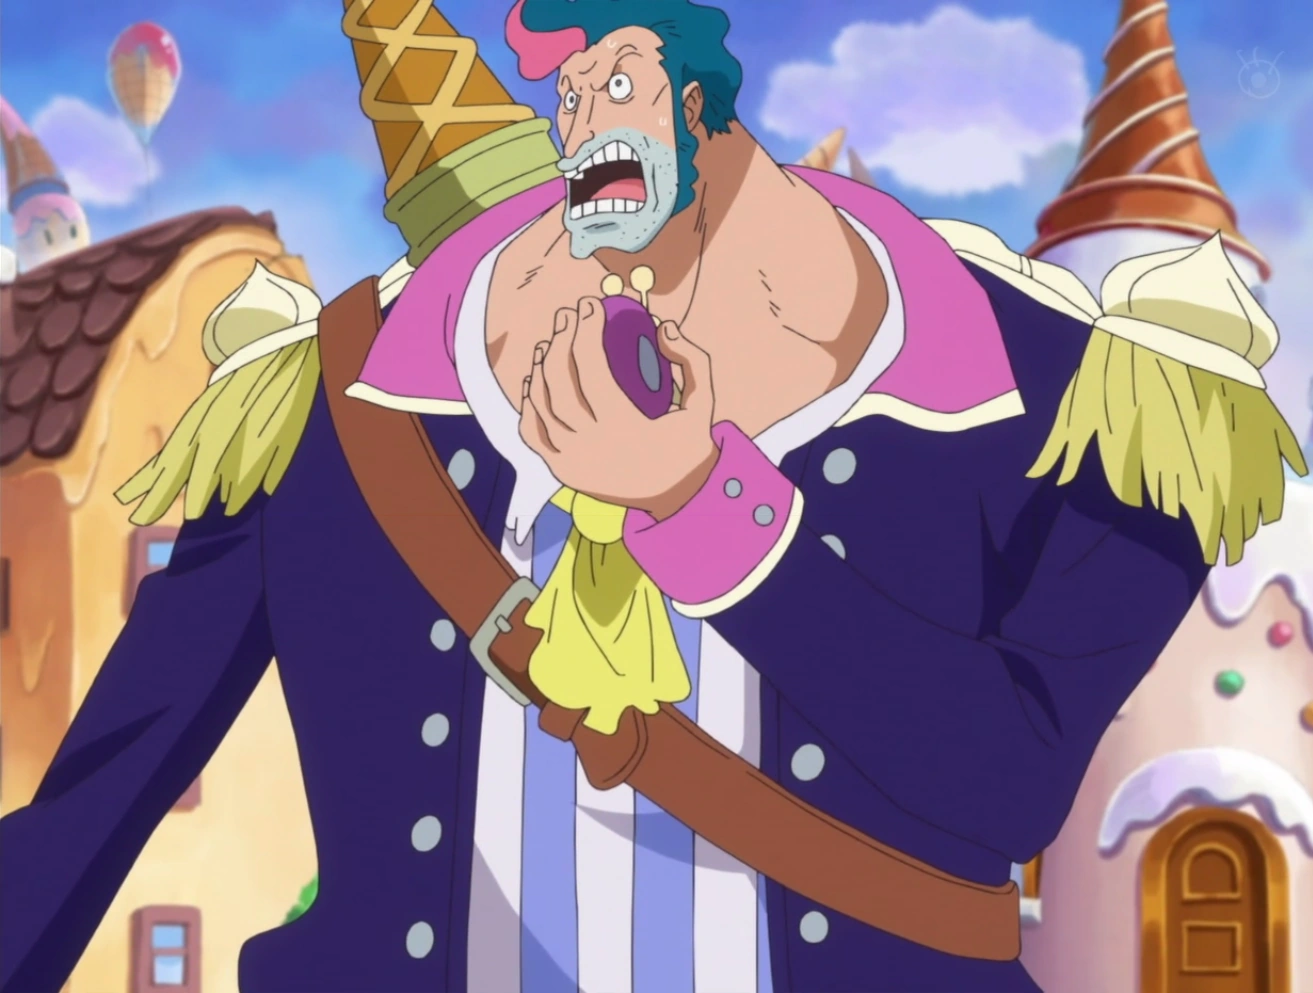 Charlotte Moscato in One Piece. Still from the anime